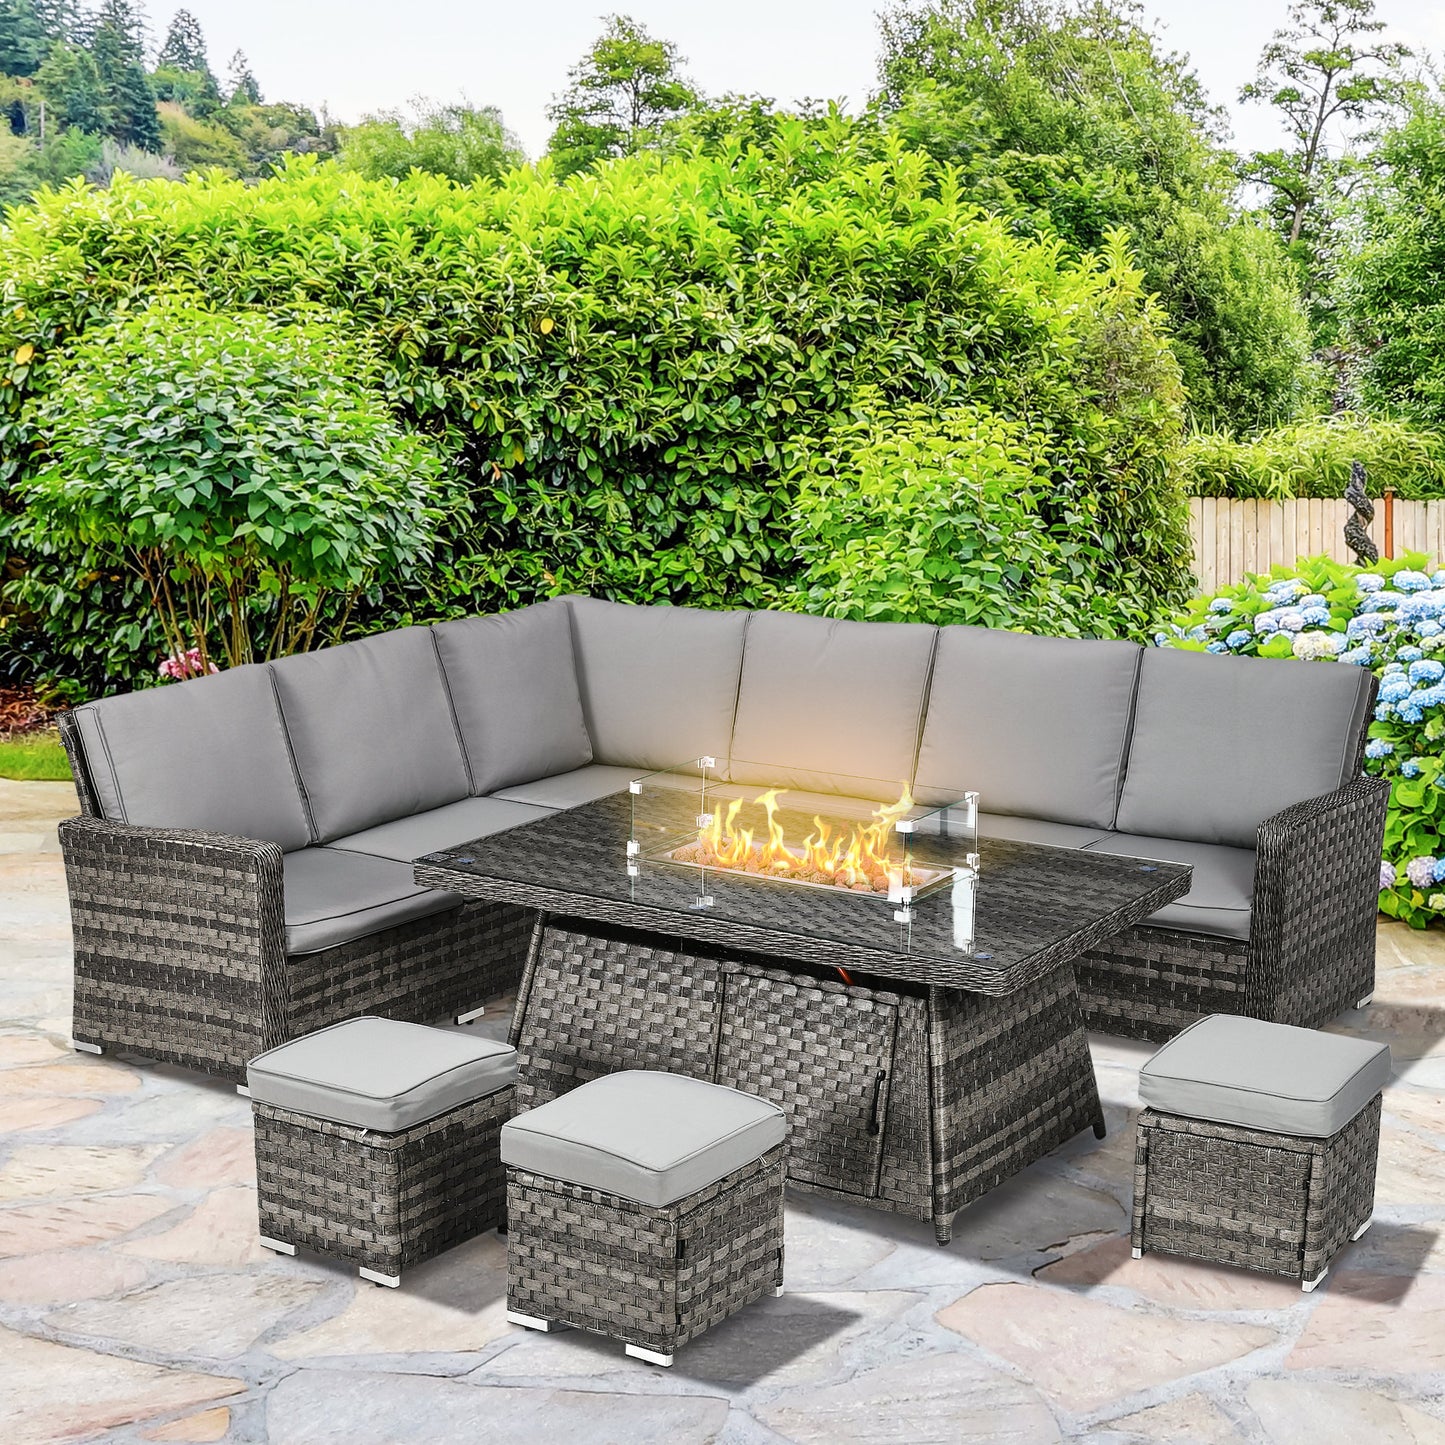 Outsunny 7 Pieces PE Rattan Garden Furniture Set, 50,000 BTU Gas Fire Pit Table, Double Corner Sofa and 3 Footstools, 6 Seater Furniture Sofa Sets with Cushions for Conservatory, Grey